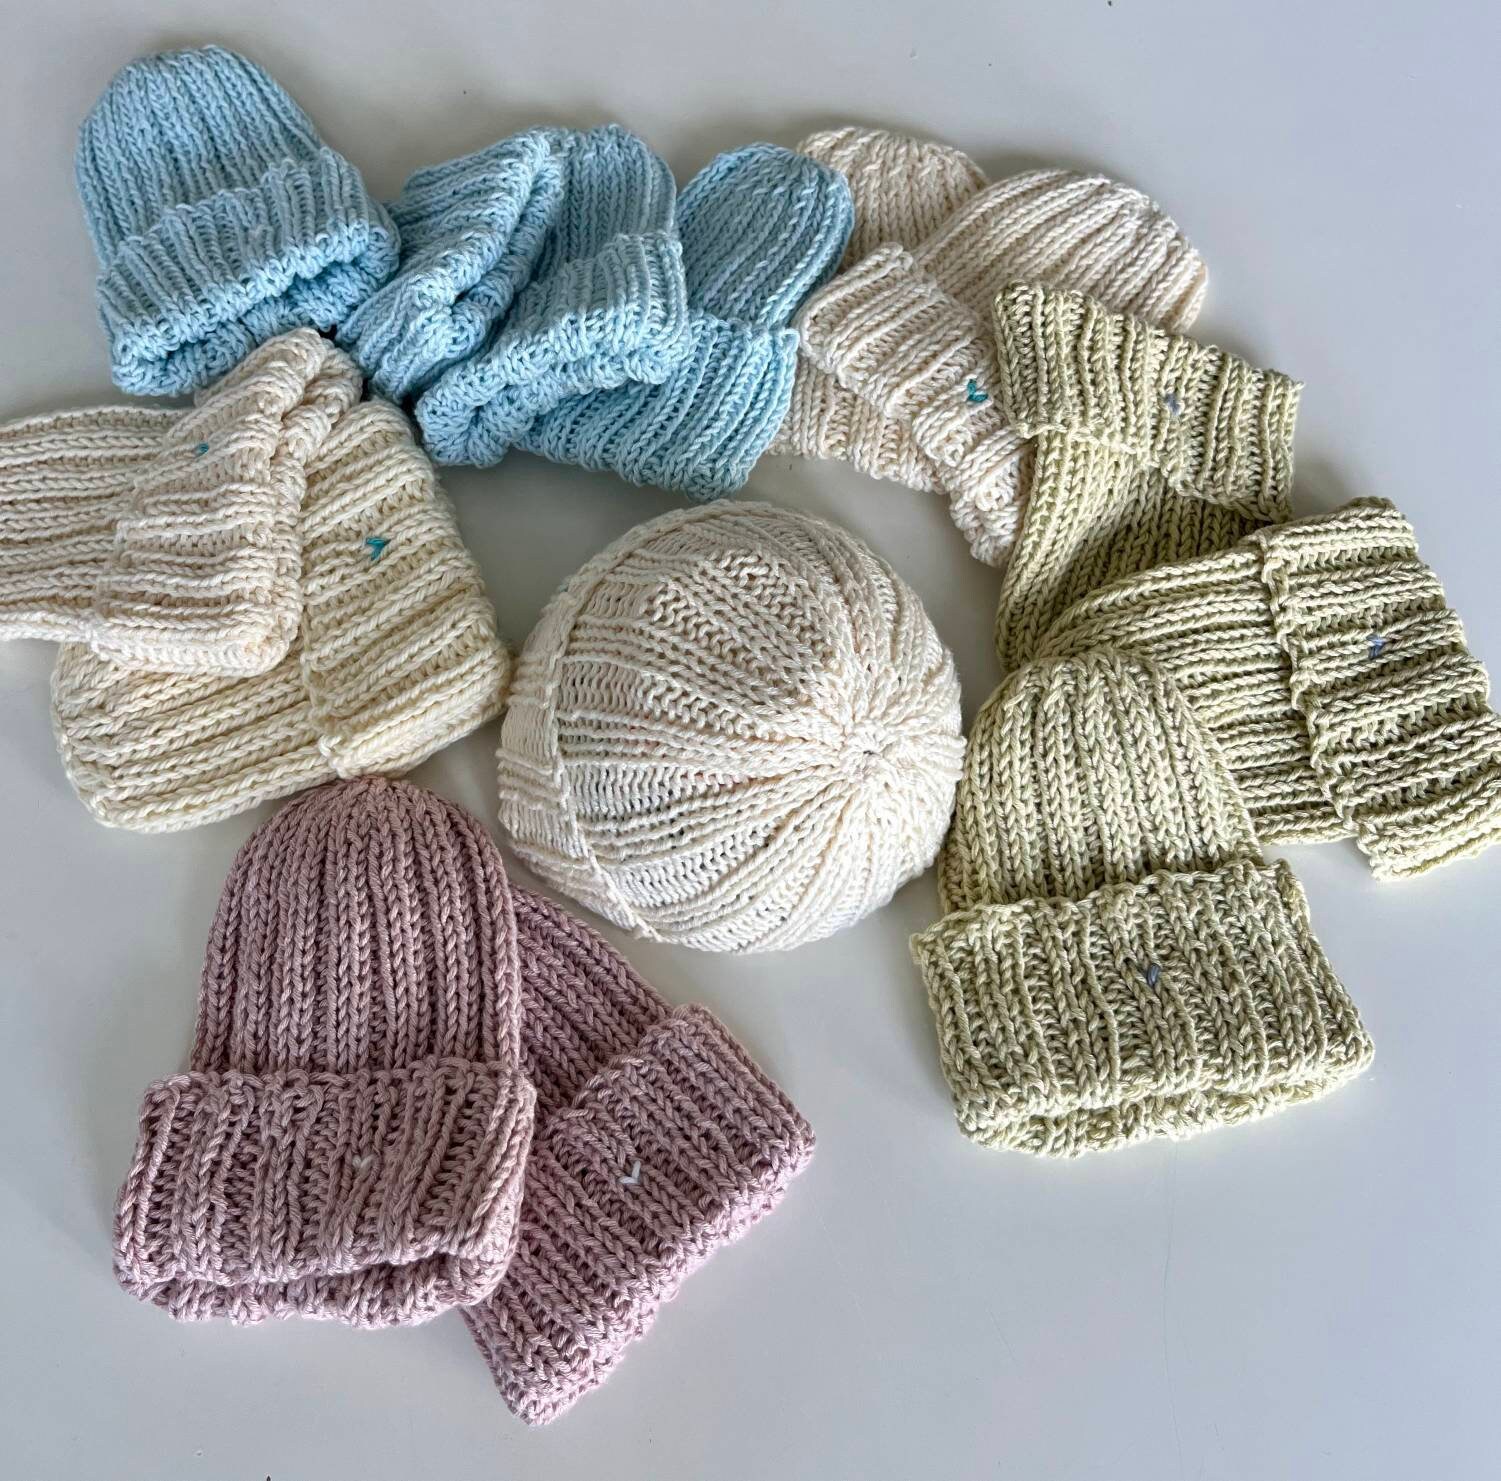 Craft Kit Chunky Yarn Learn Arm Knitting With Our Blanket DIY Kit